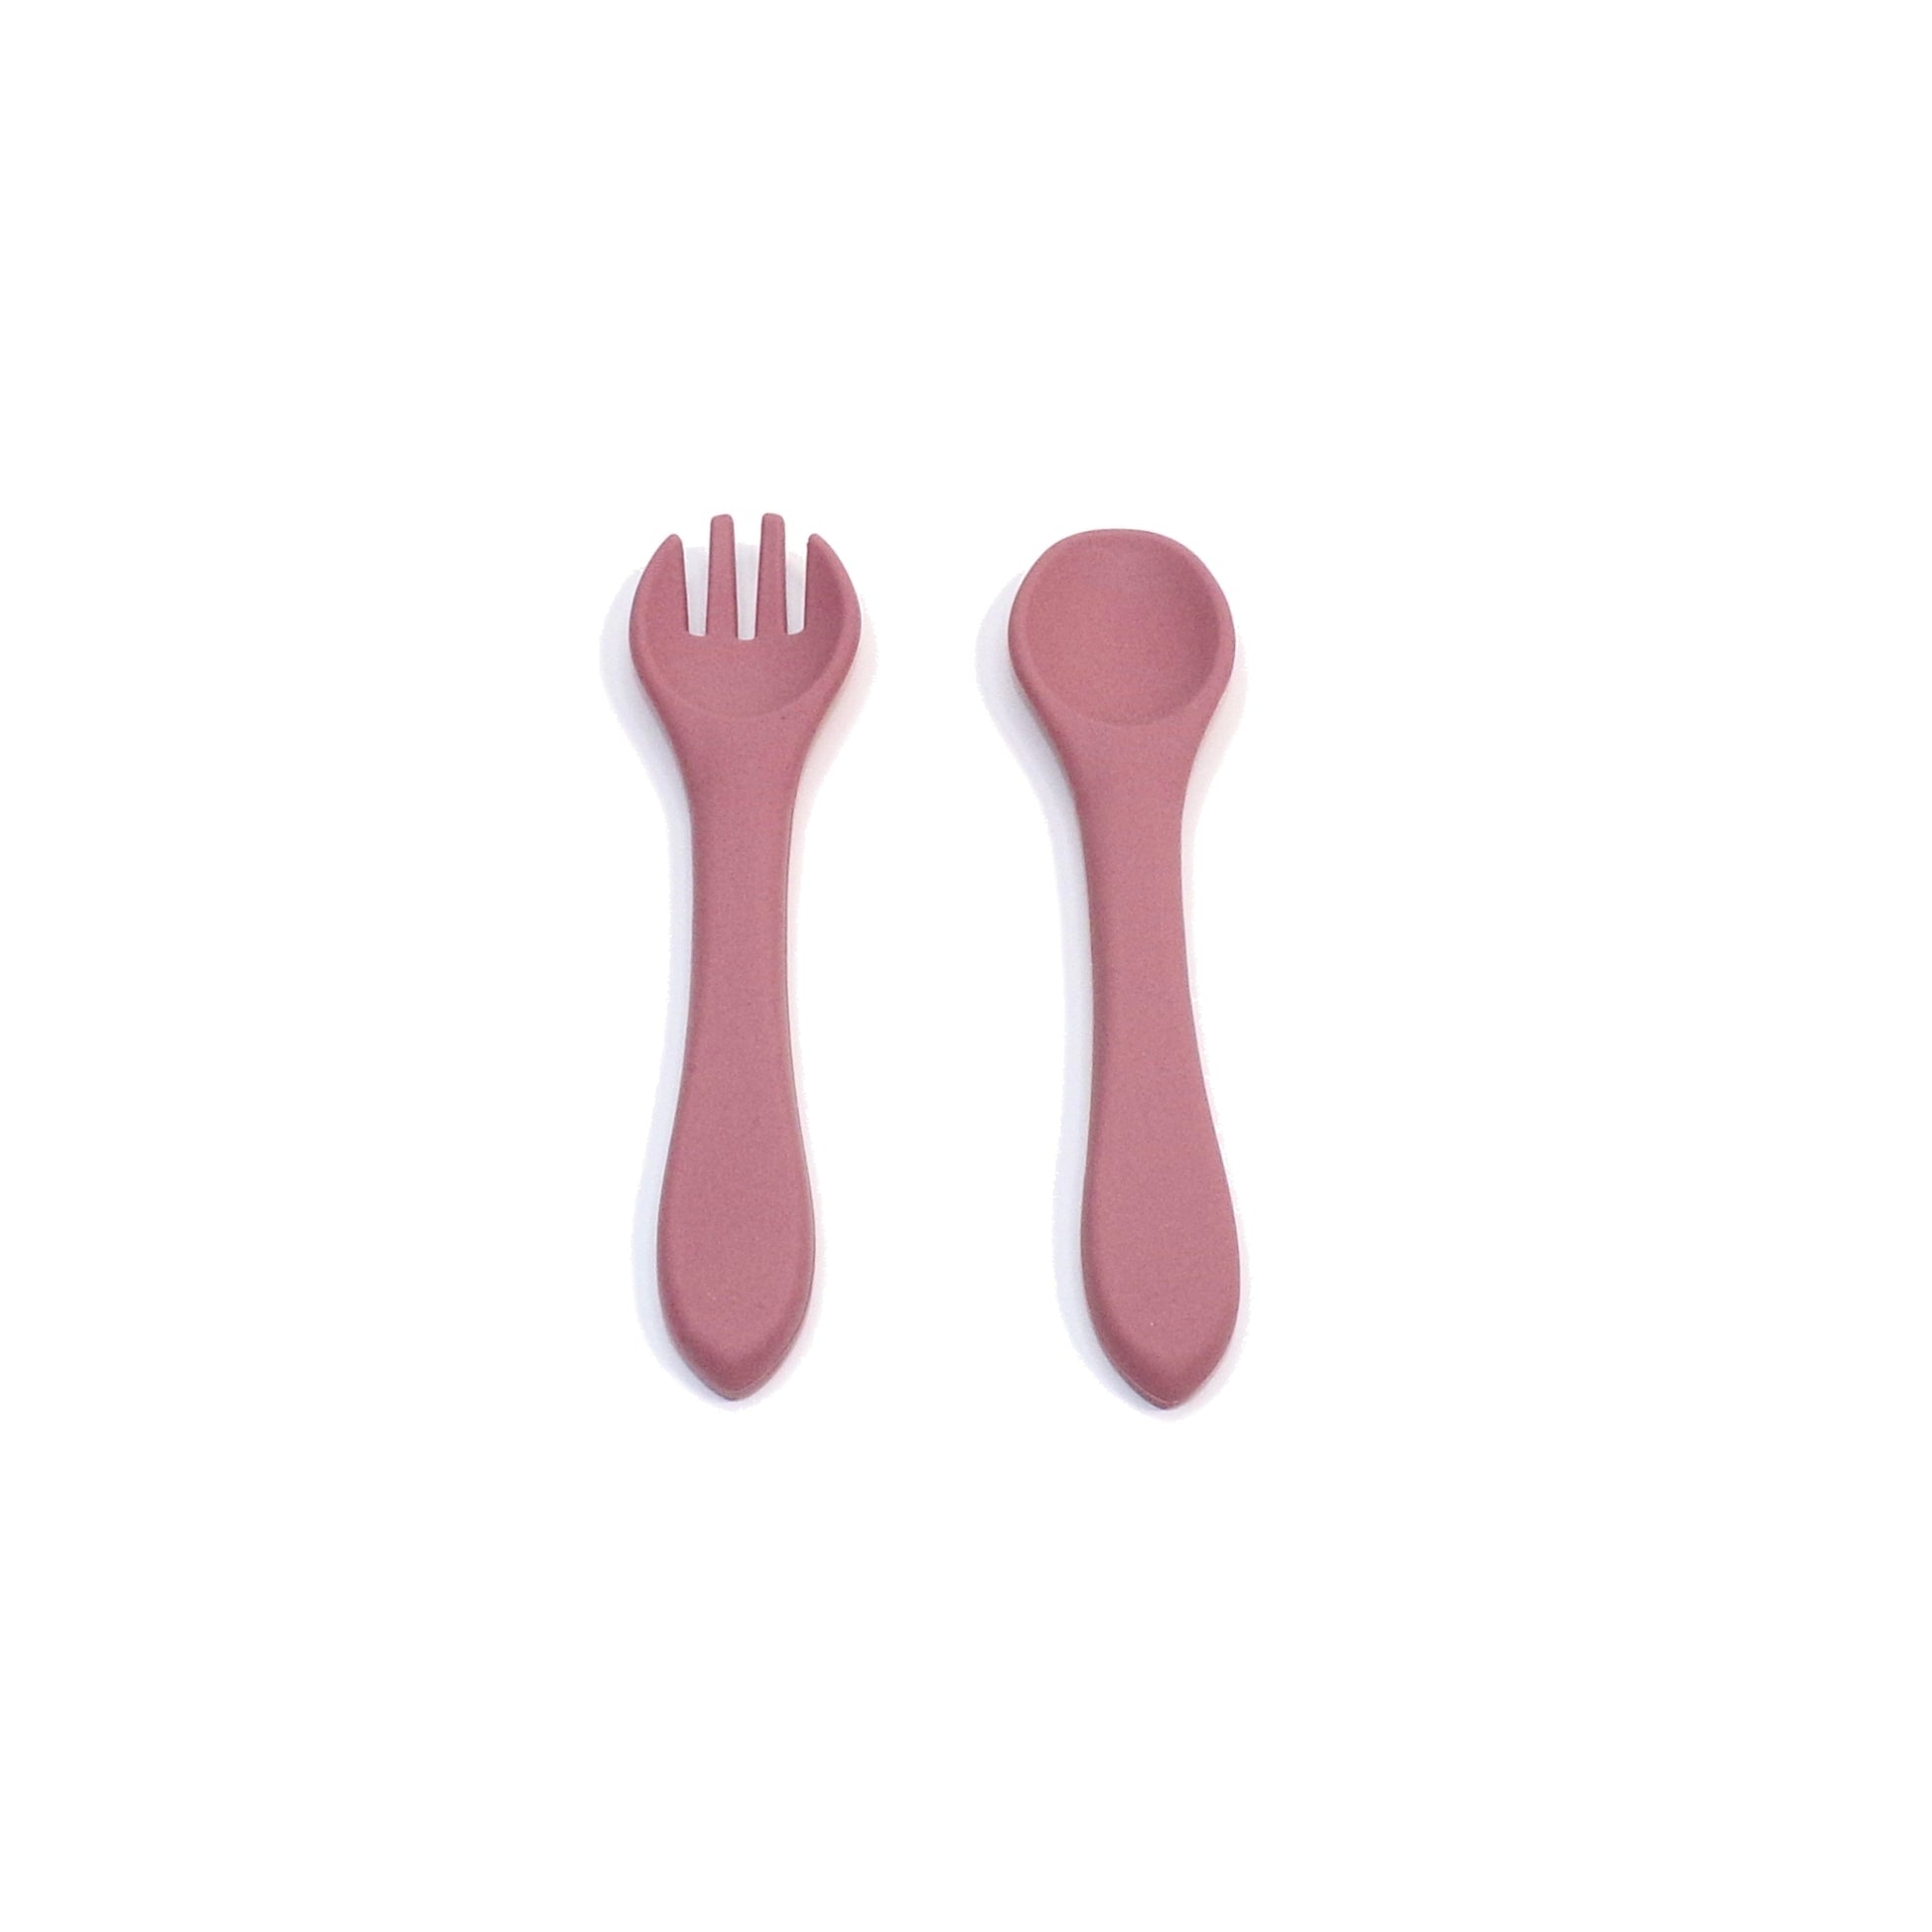 A set of pink silicone cutlery, a fork and spoon. The utensils are designed for young children.